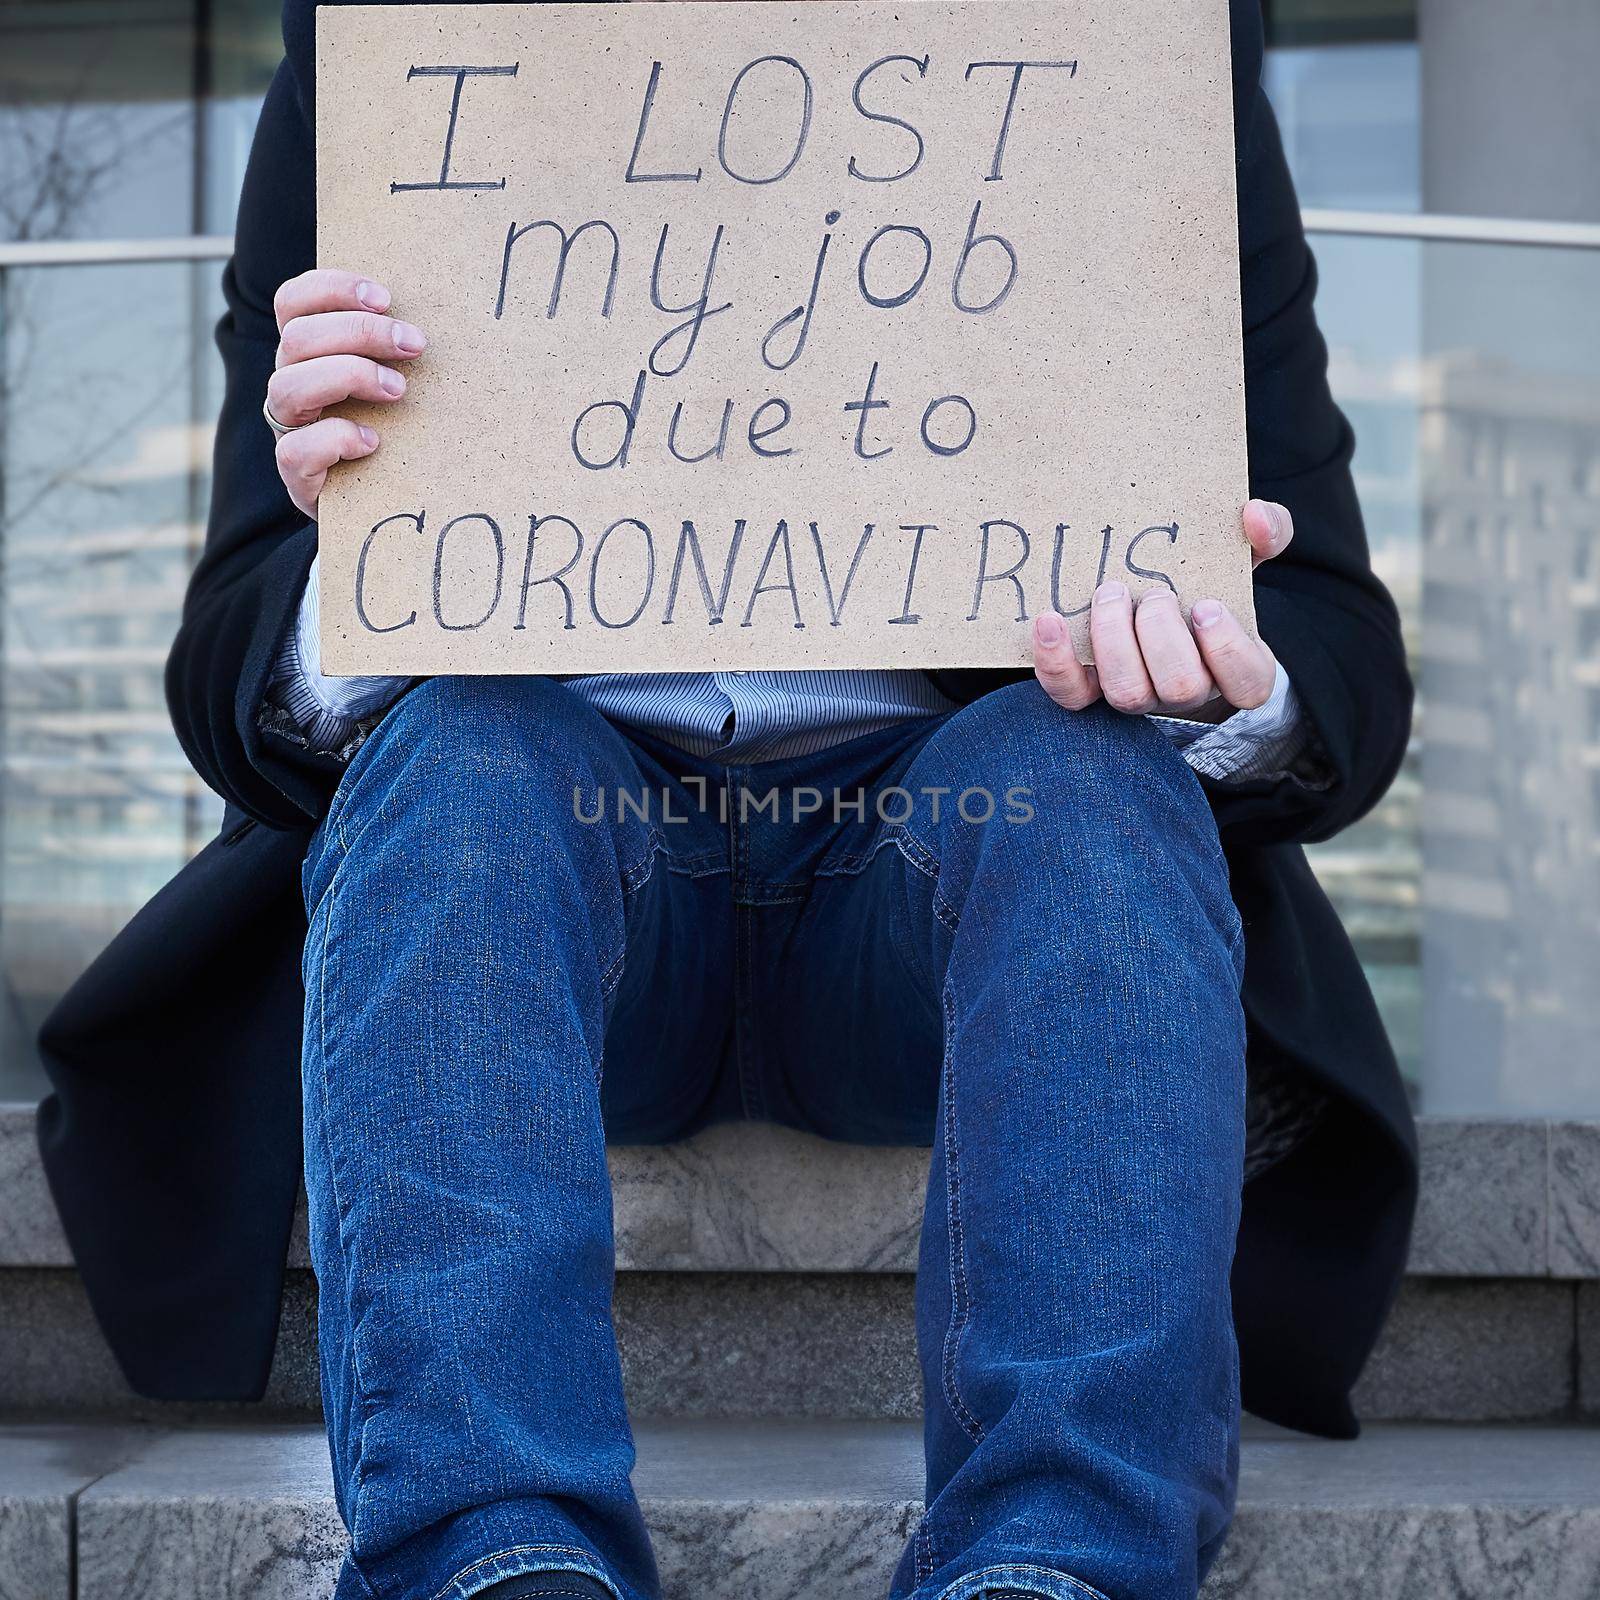 Job loss due to COVID-19 virus pandemic concept. Unrecognizable man holds sign I lost my job because of coronavirus. Male sitting on stairs of building, former place of work in business center